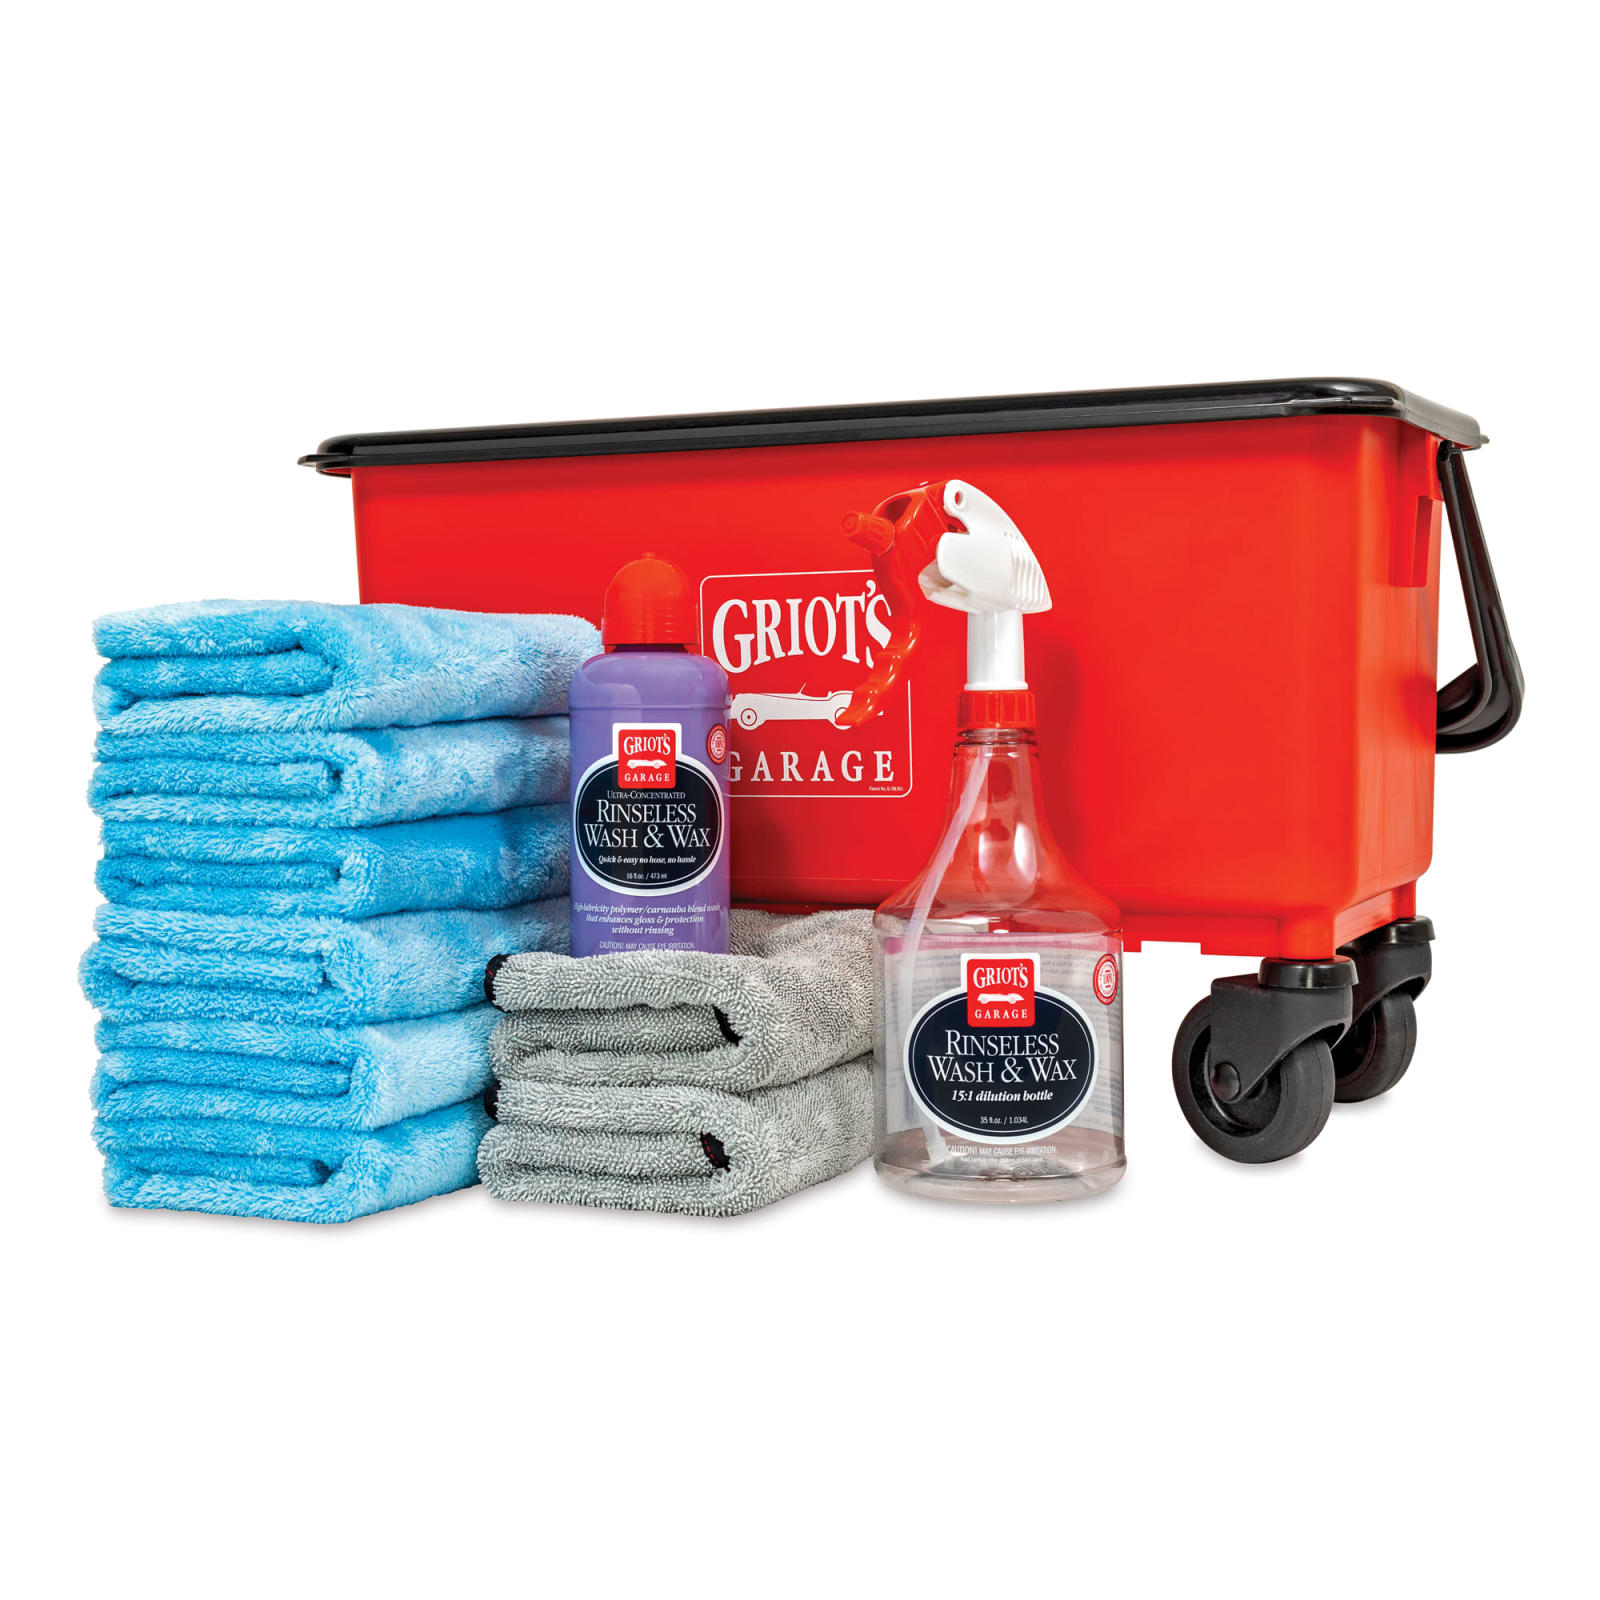 Rinseless Wash & Wax Secondary Bottle - Griot's Garage